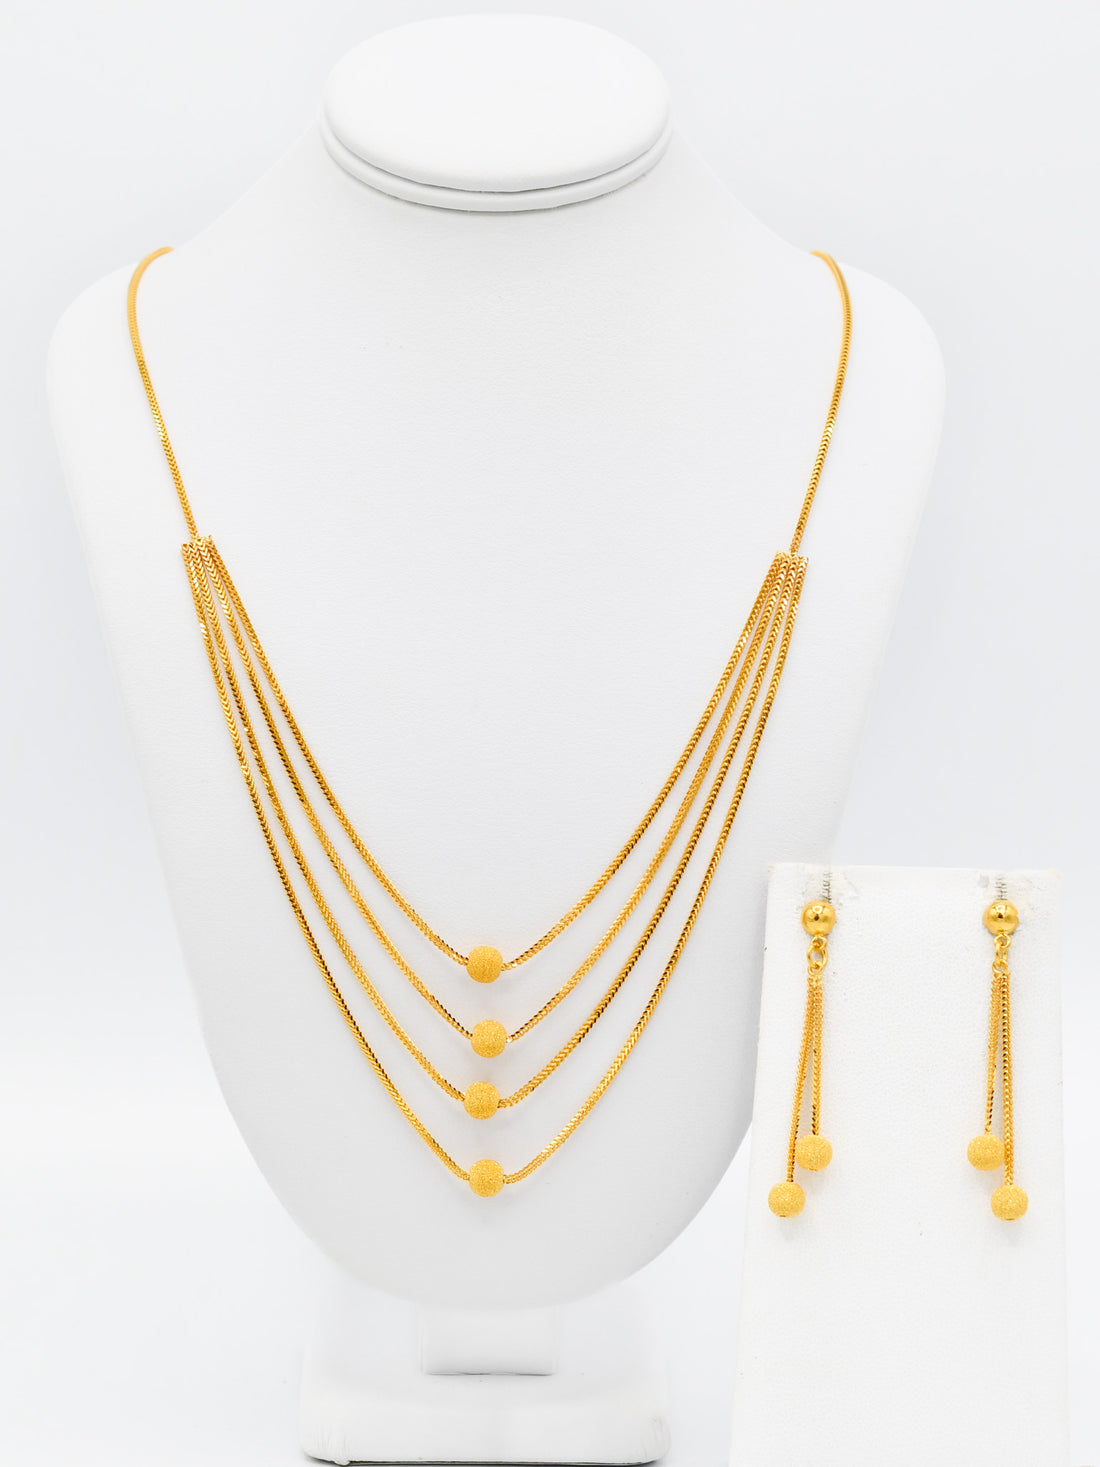 22ct Gold Ball 4 Row Necklace Set - Roop Darshan